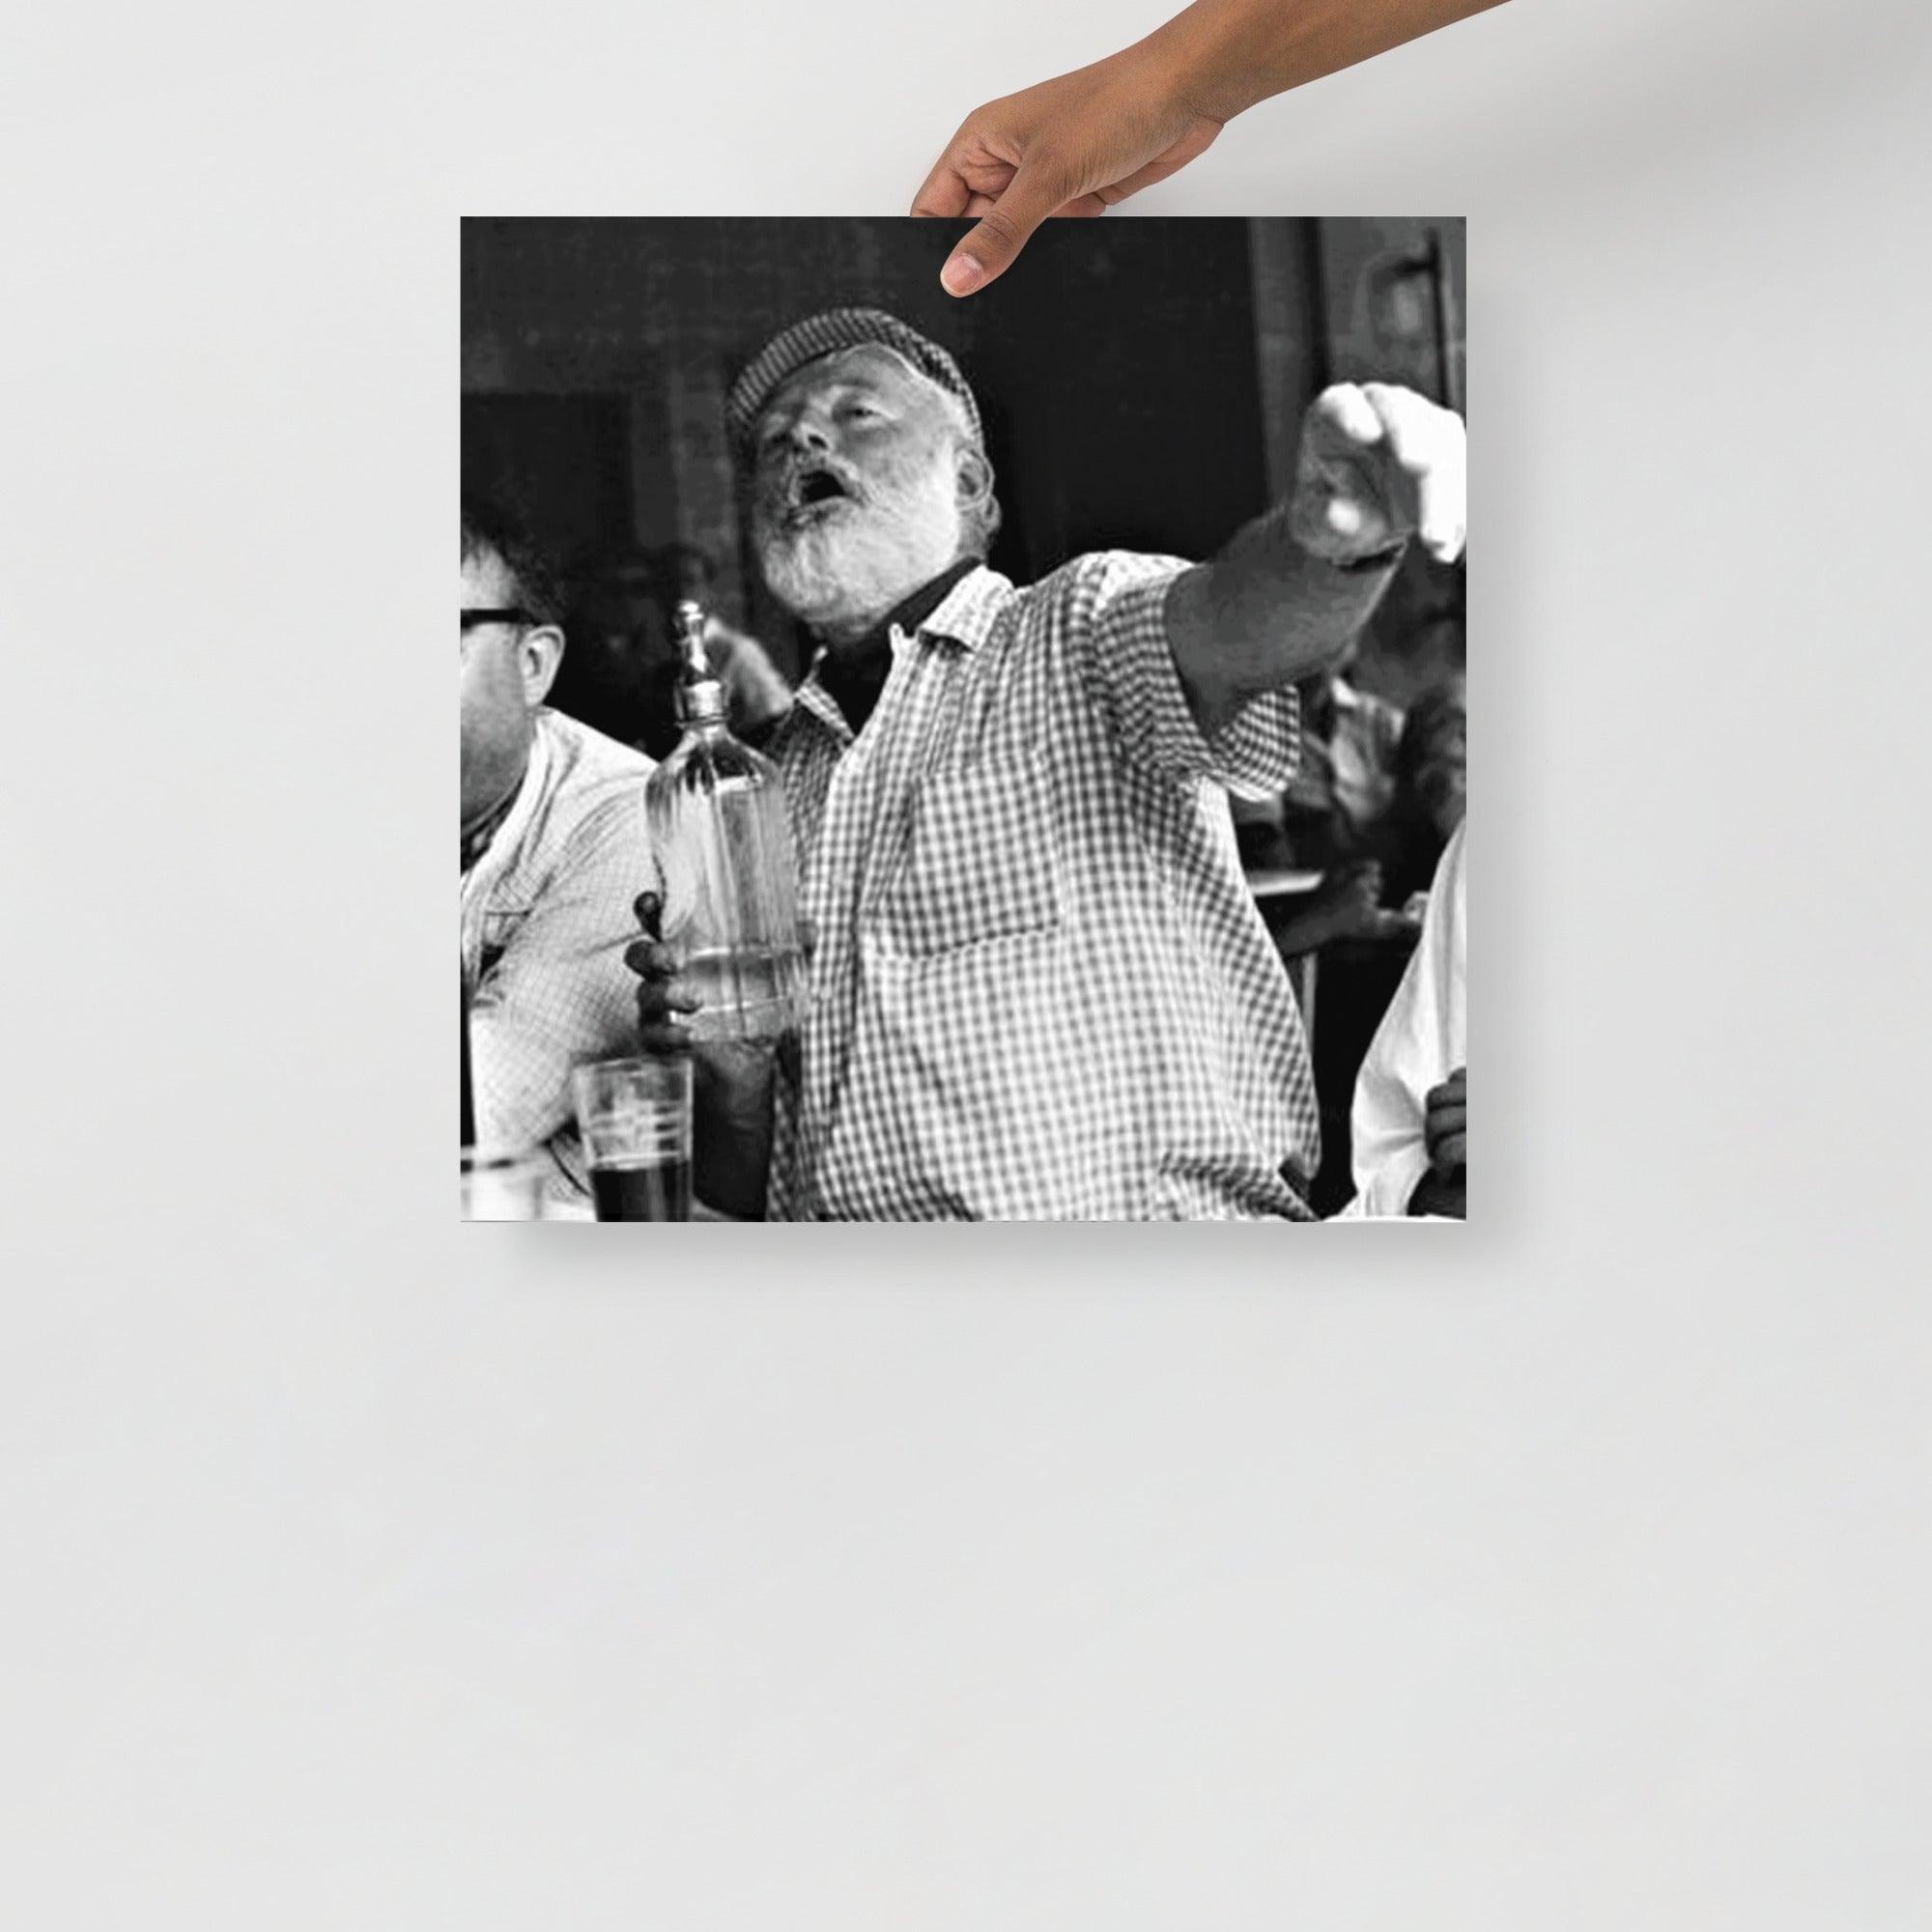 An Ernest Hemingway at a Bar poster on a plain backdrop in size 18x18”.